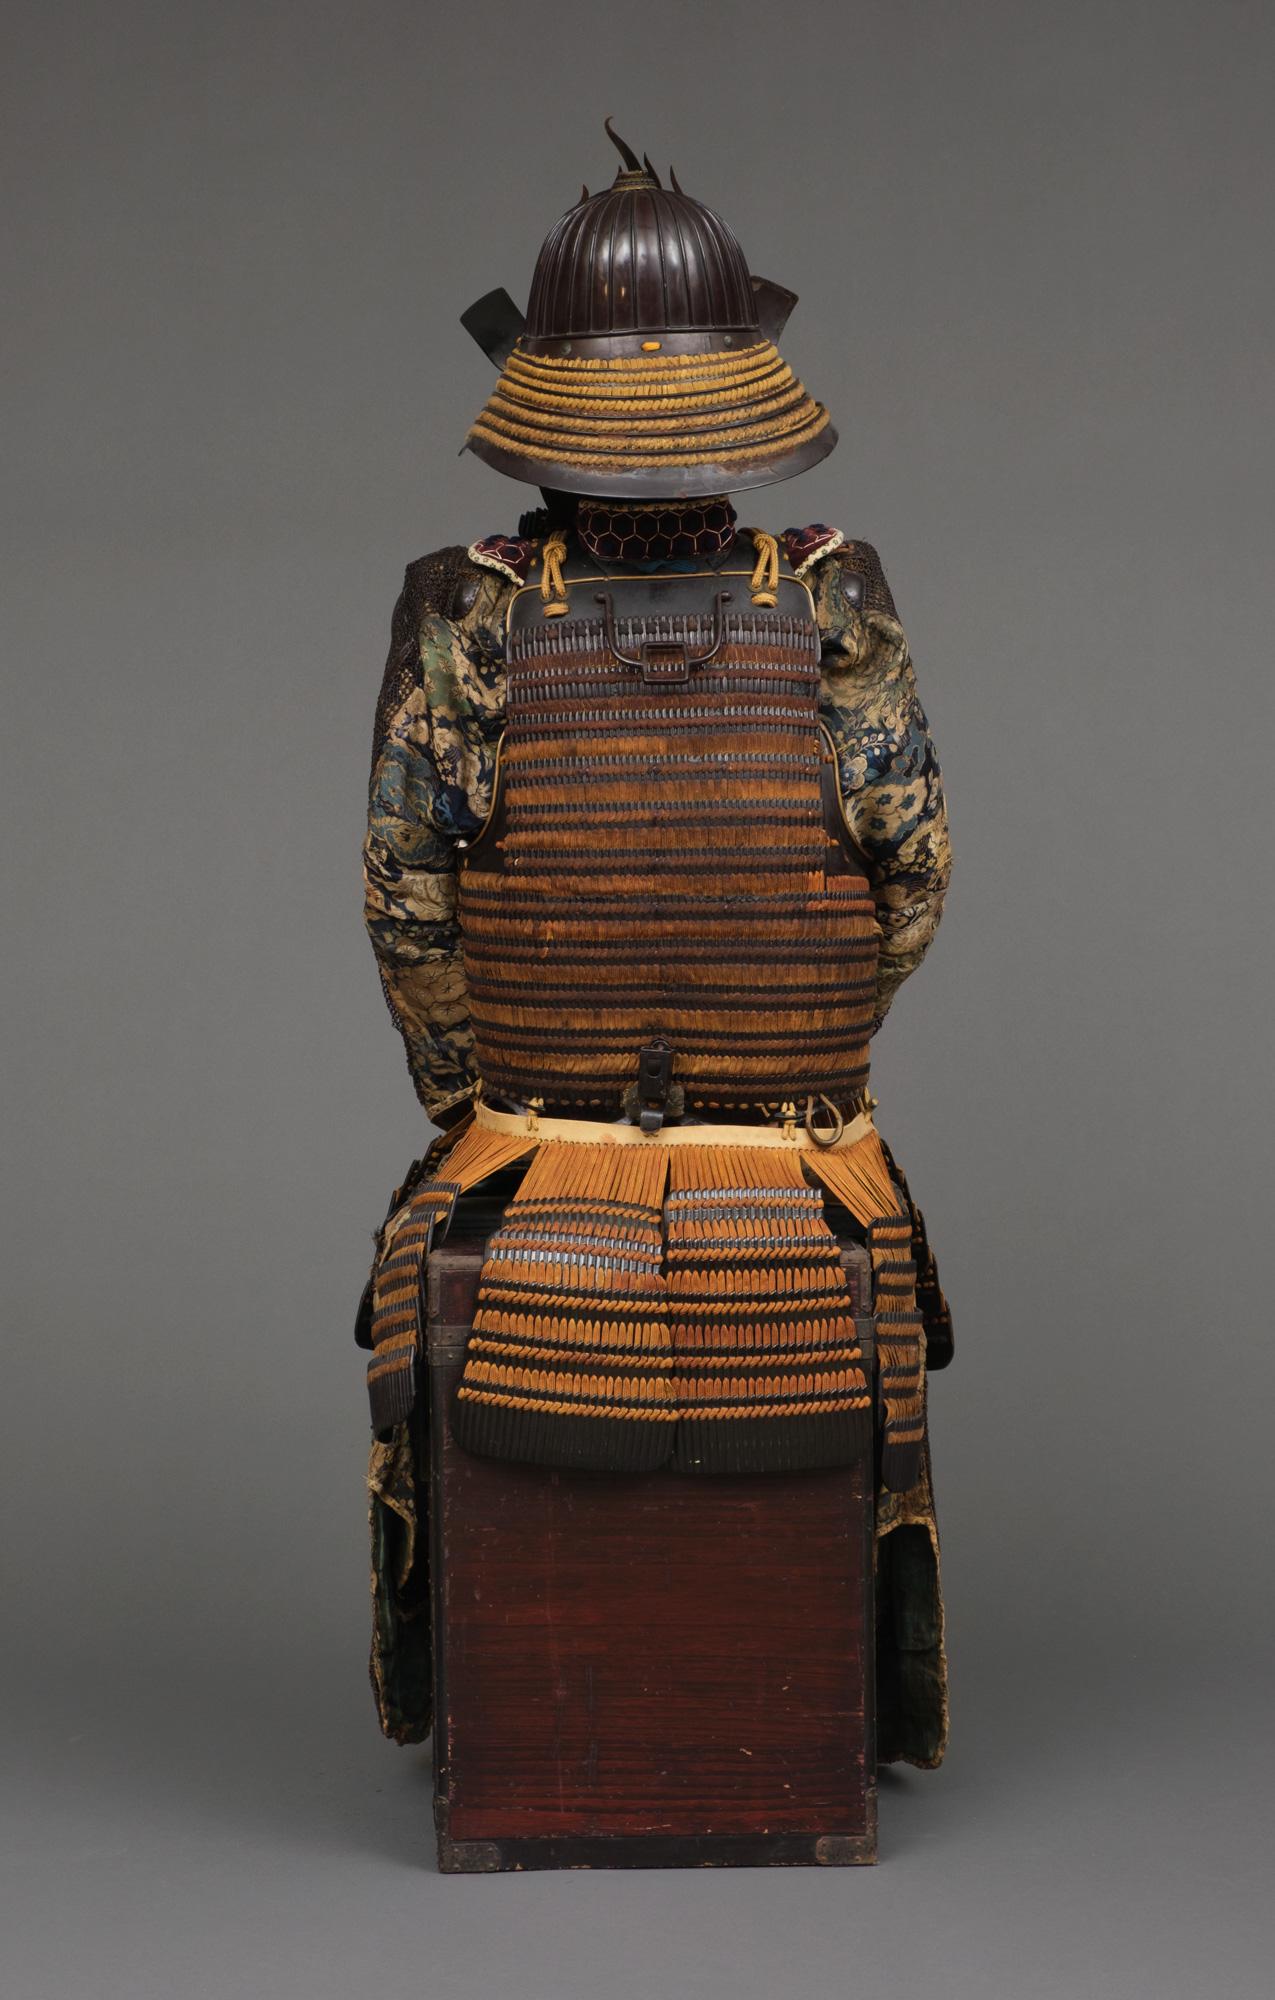 Rare set of 2 Japanese suits-of-armour, complete with 2 matching folding screens For Sale 1